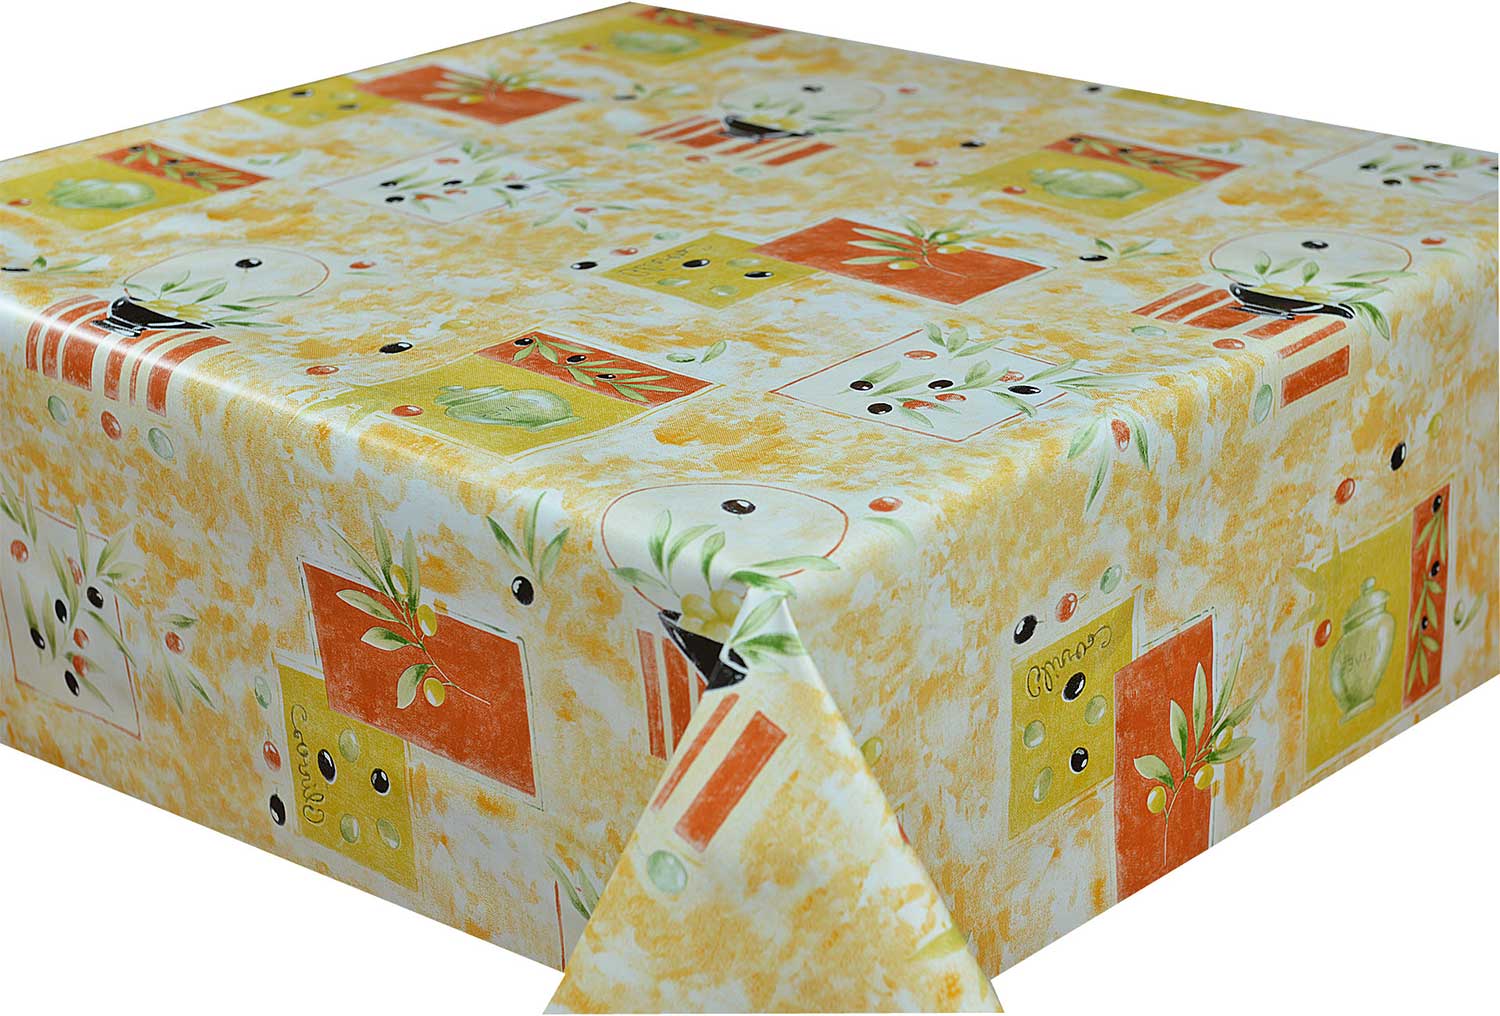 Table Cover - Printed Table Cover - Europe Design Table Cover - BS-N8096B